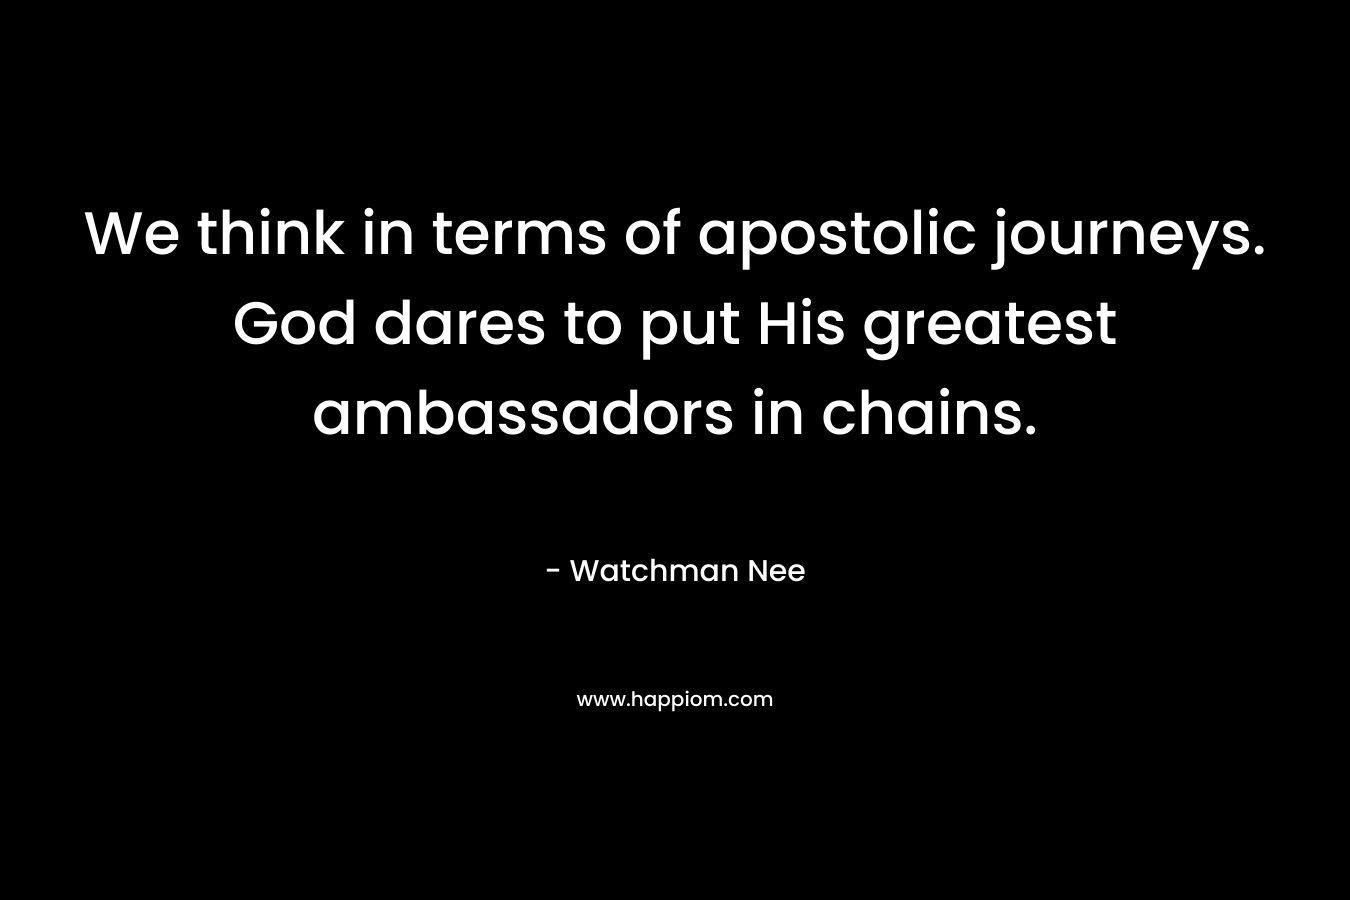 We think in terms of apostolic journeys. God dares to put His greatest ambassadors in chains. – Watchman Nee